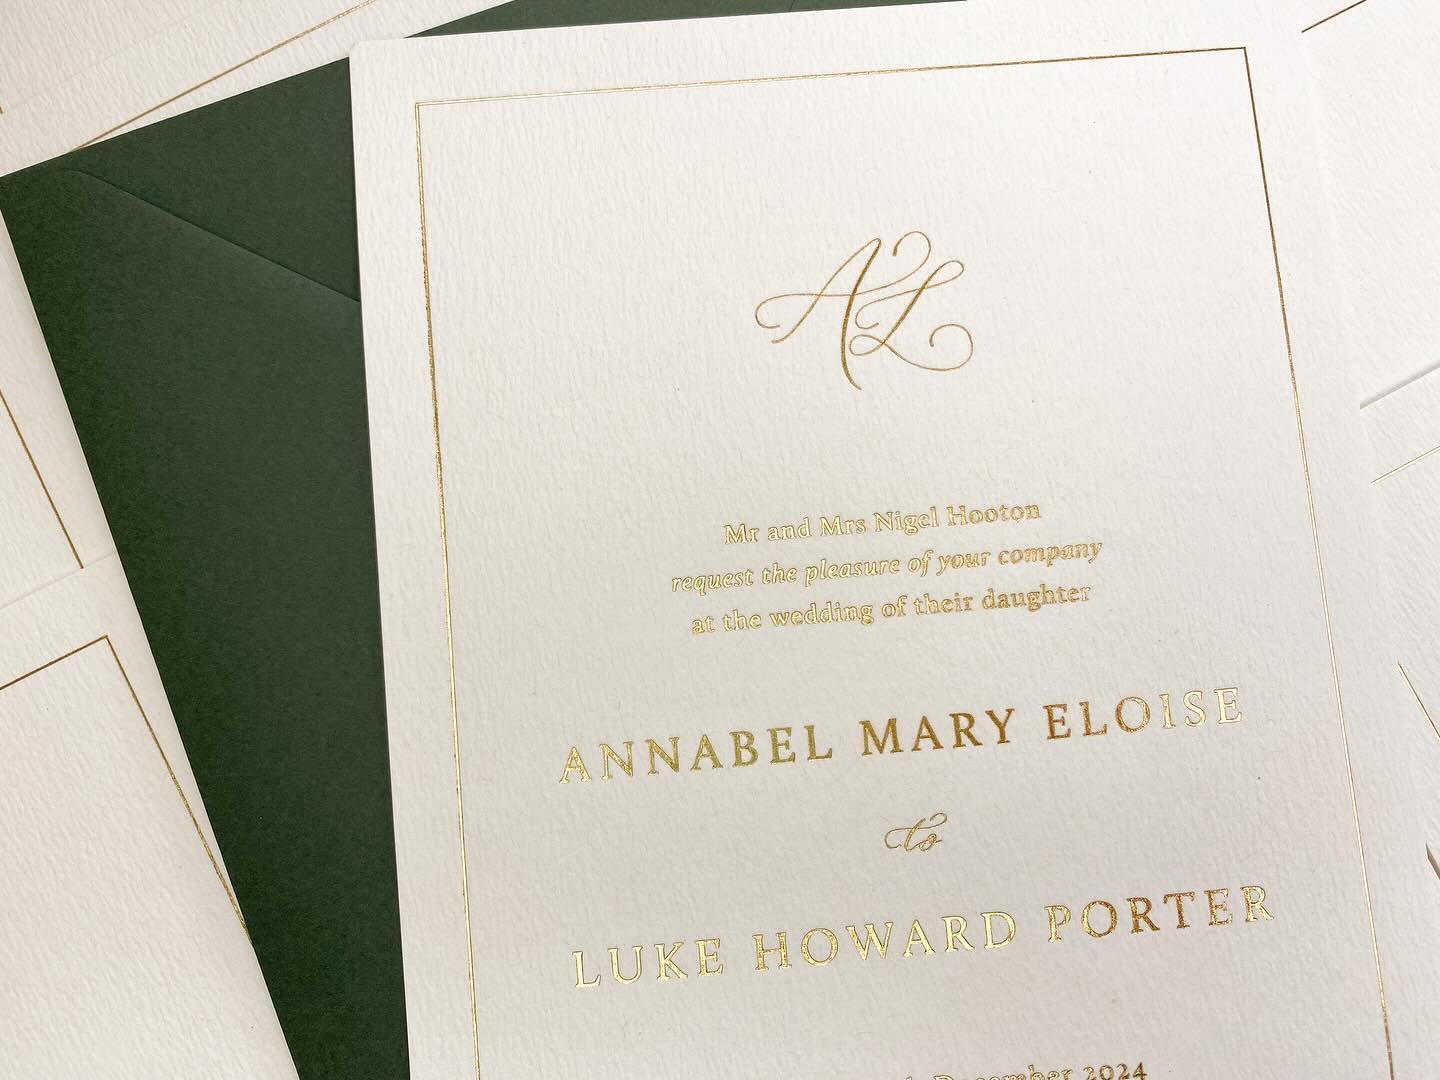 Hot foiled wedding invitation with a bespoke monogram for A &amp; L&rsquo;s winter wedding ✨

Printed onto textured recycled card with a forest green envelope 🤍

#winterweddinginvitation #winterweddinginvitations #winterweddinginspo #hotfoiledinvita